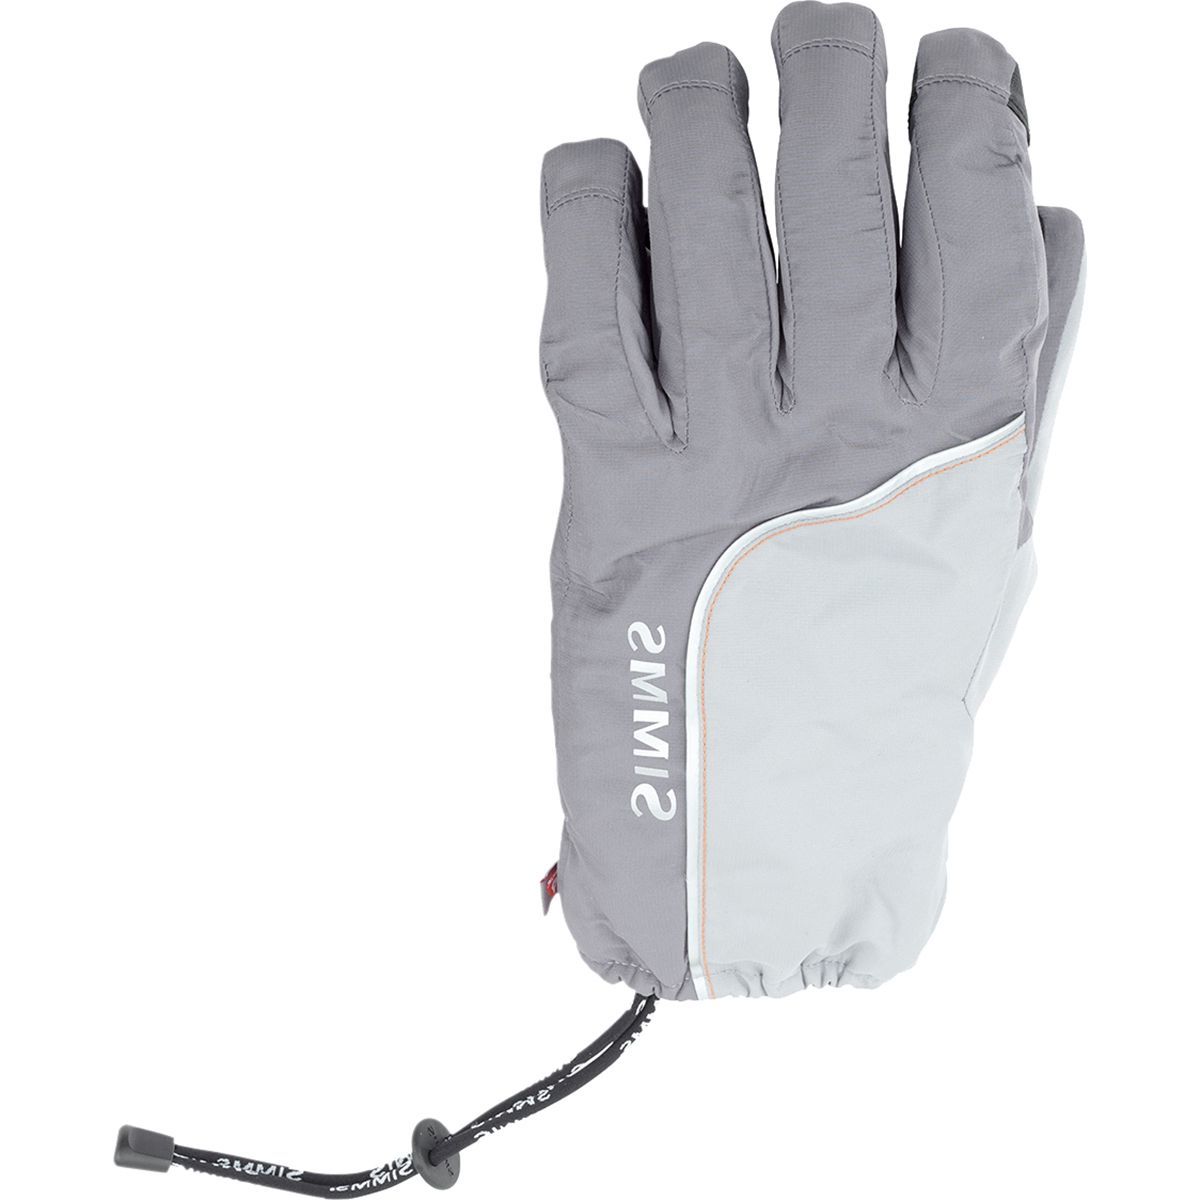 Simms Outdry Insulated Glove - Men's